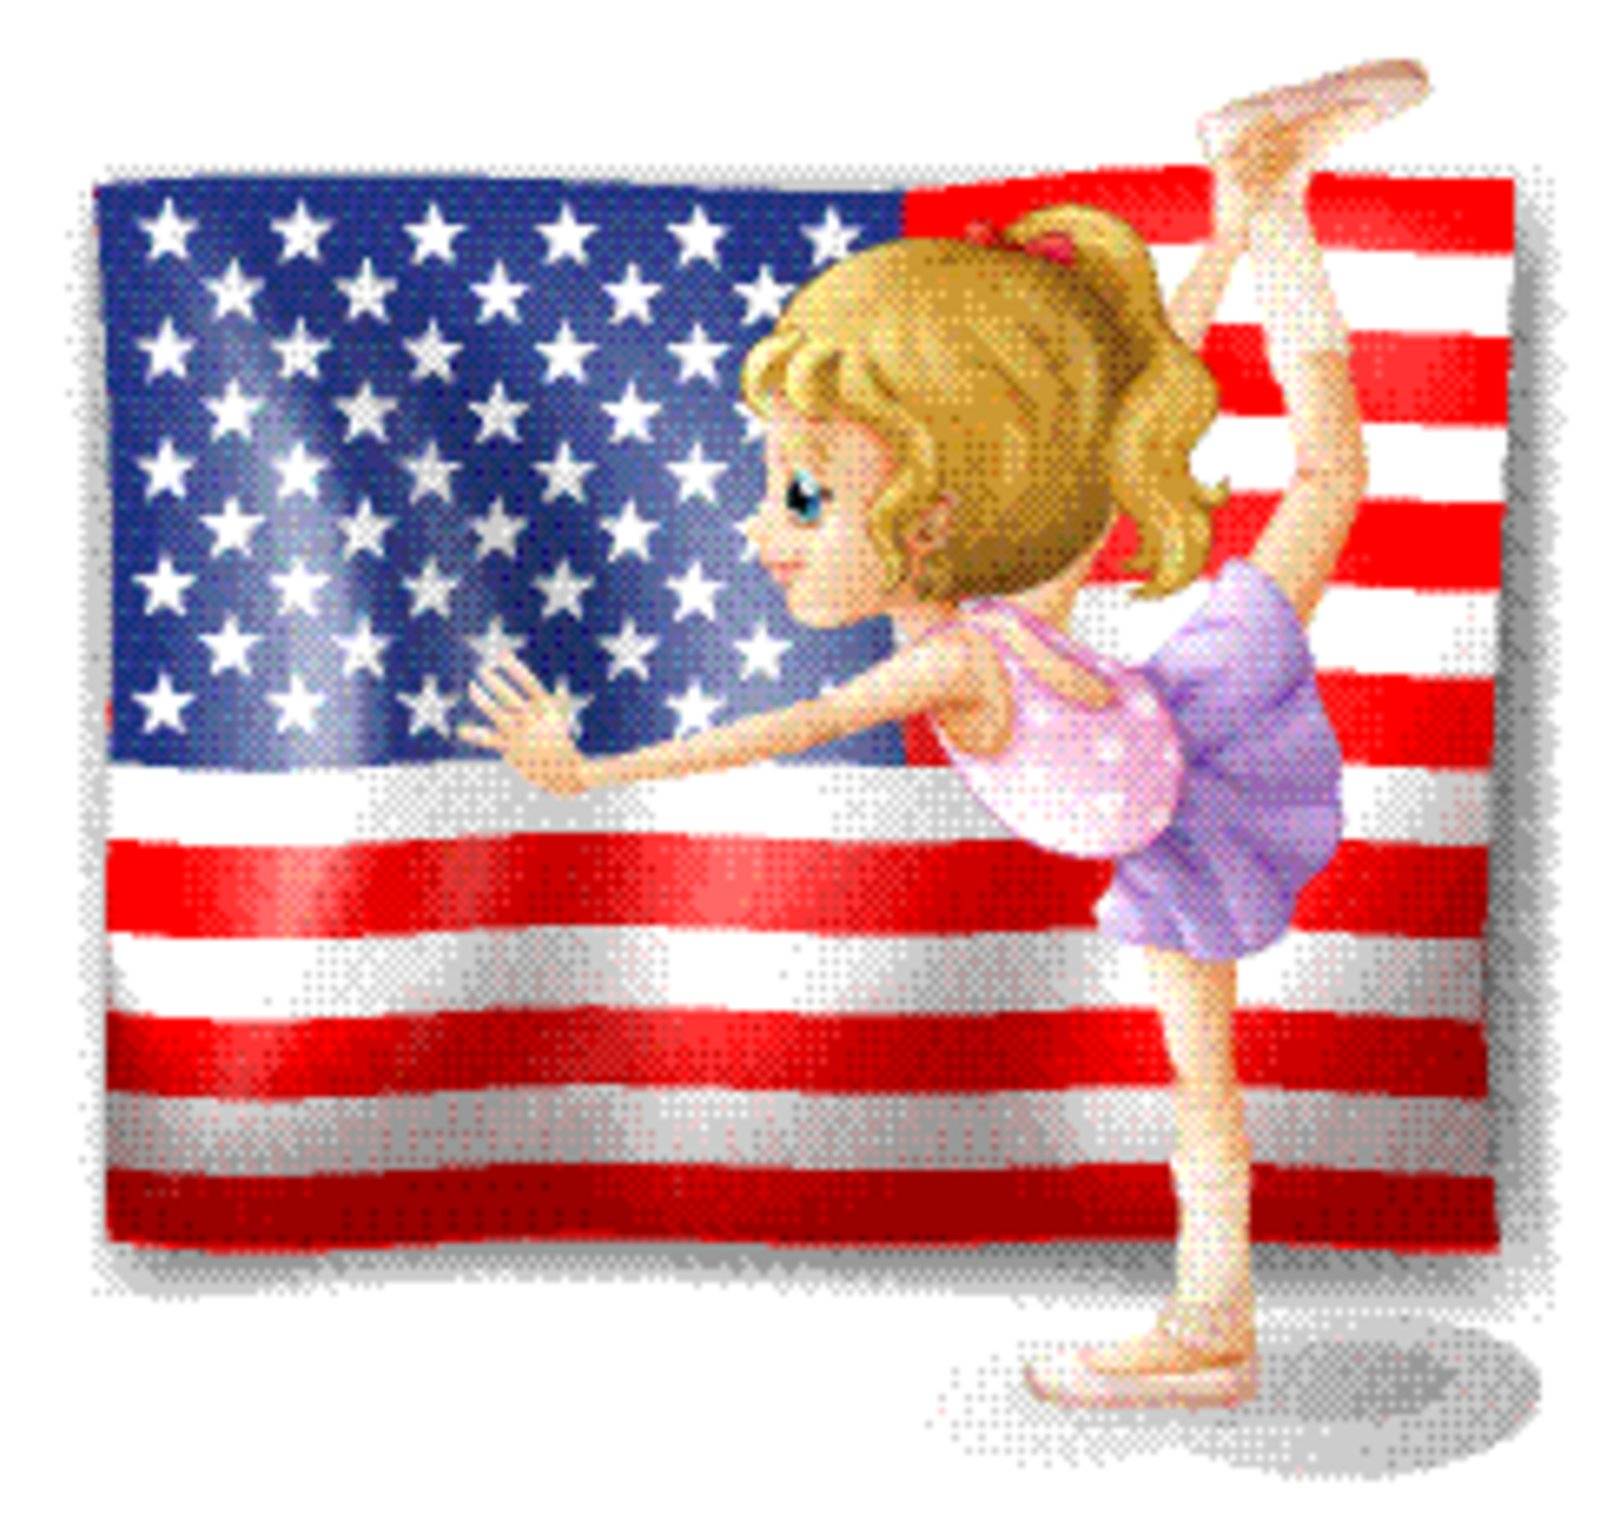 Illustration of the flag of USA at the back of a dancer on a white background